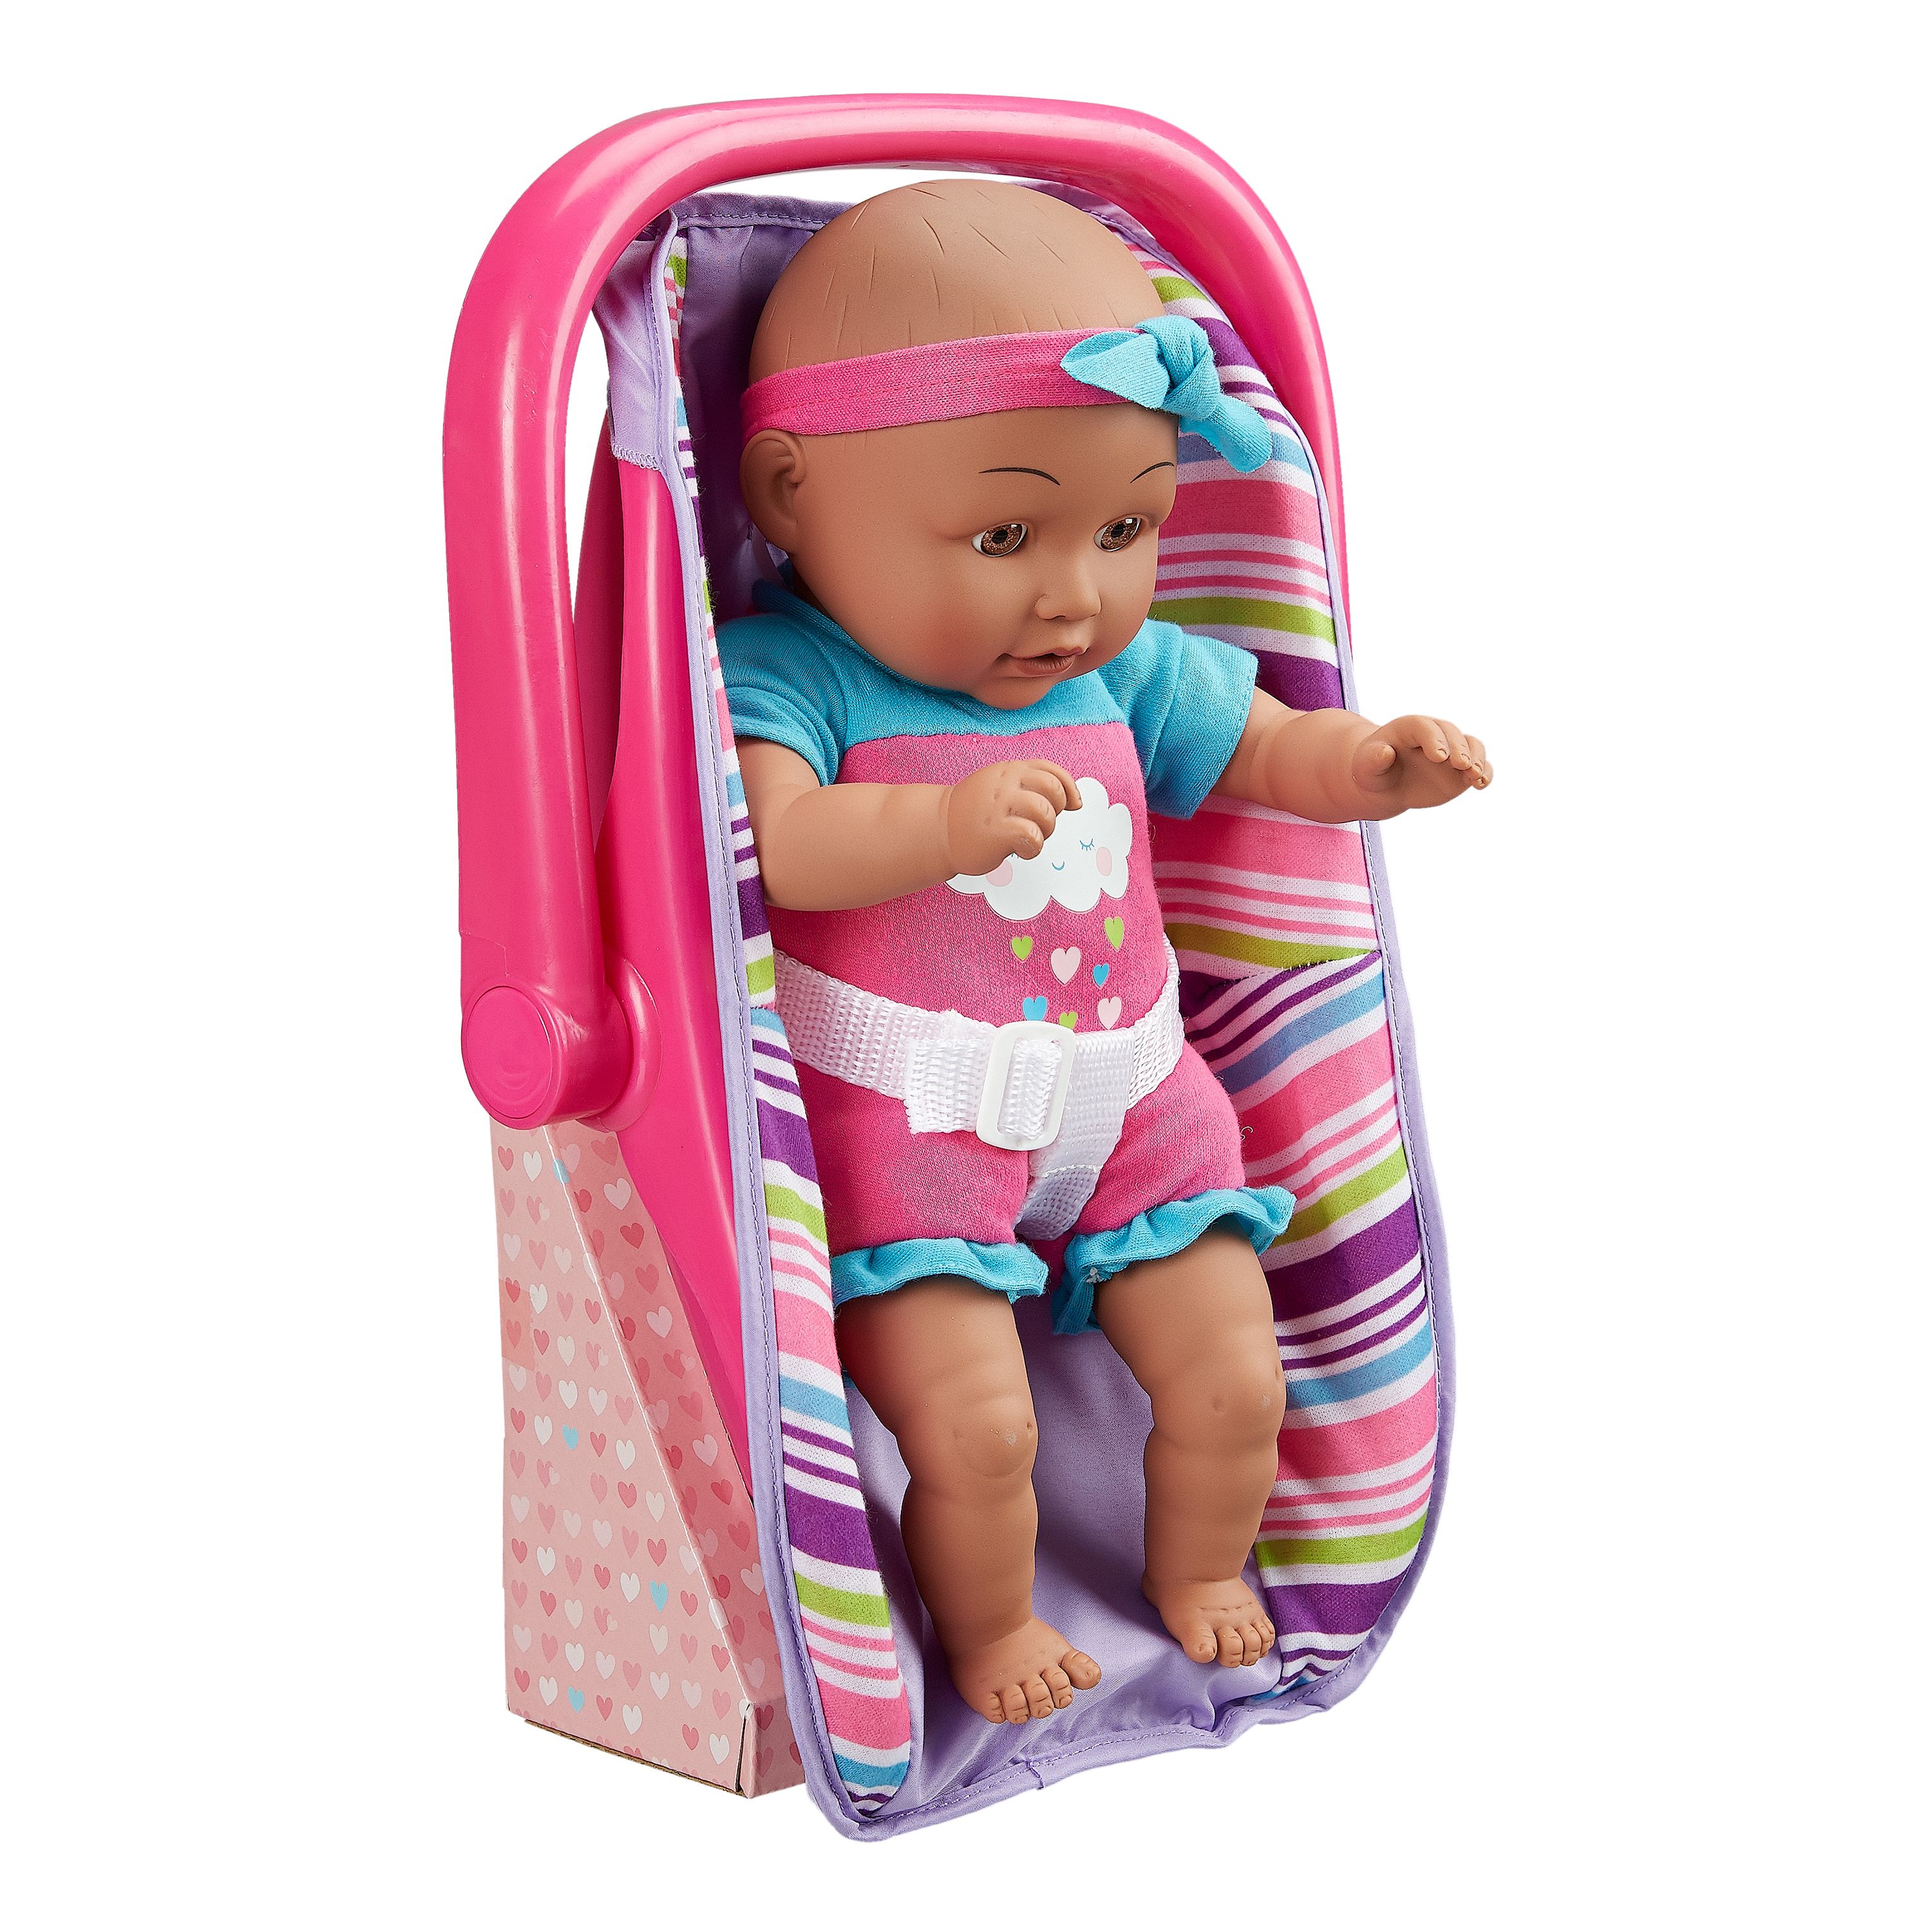 My Sweet Love 13" Baby Doll with Carrier, Pink, African American - image 2 of 4